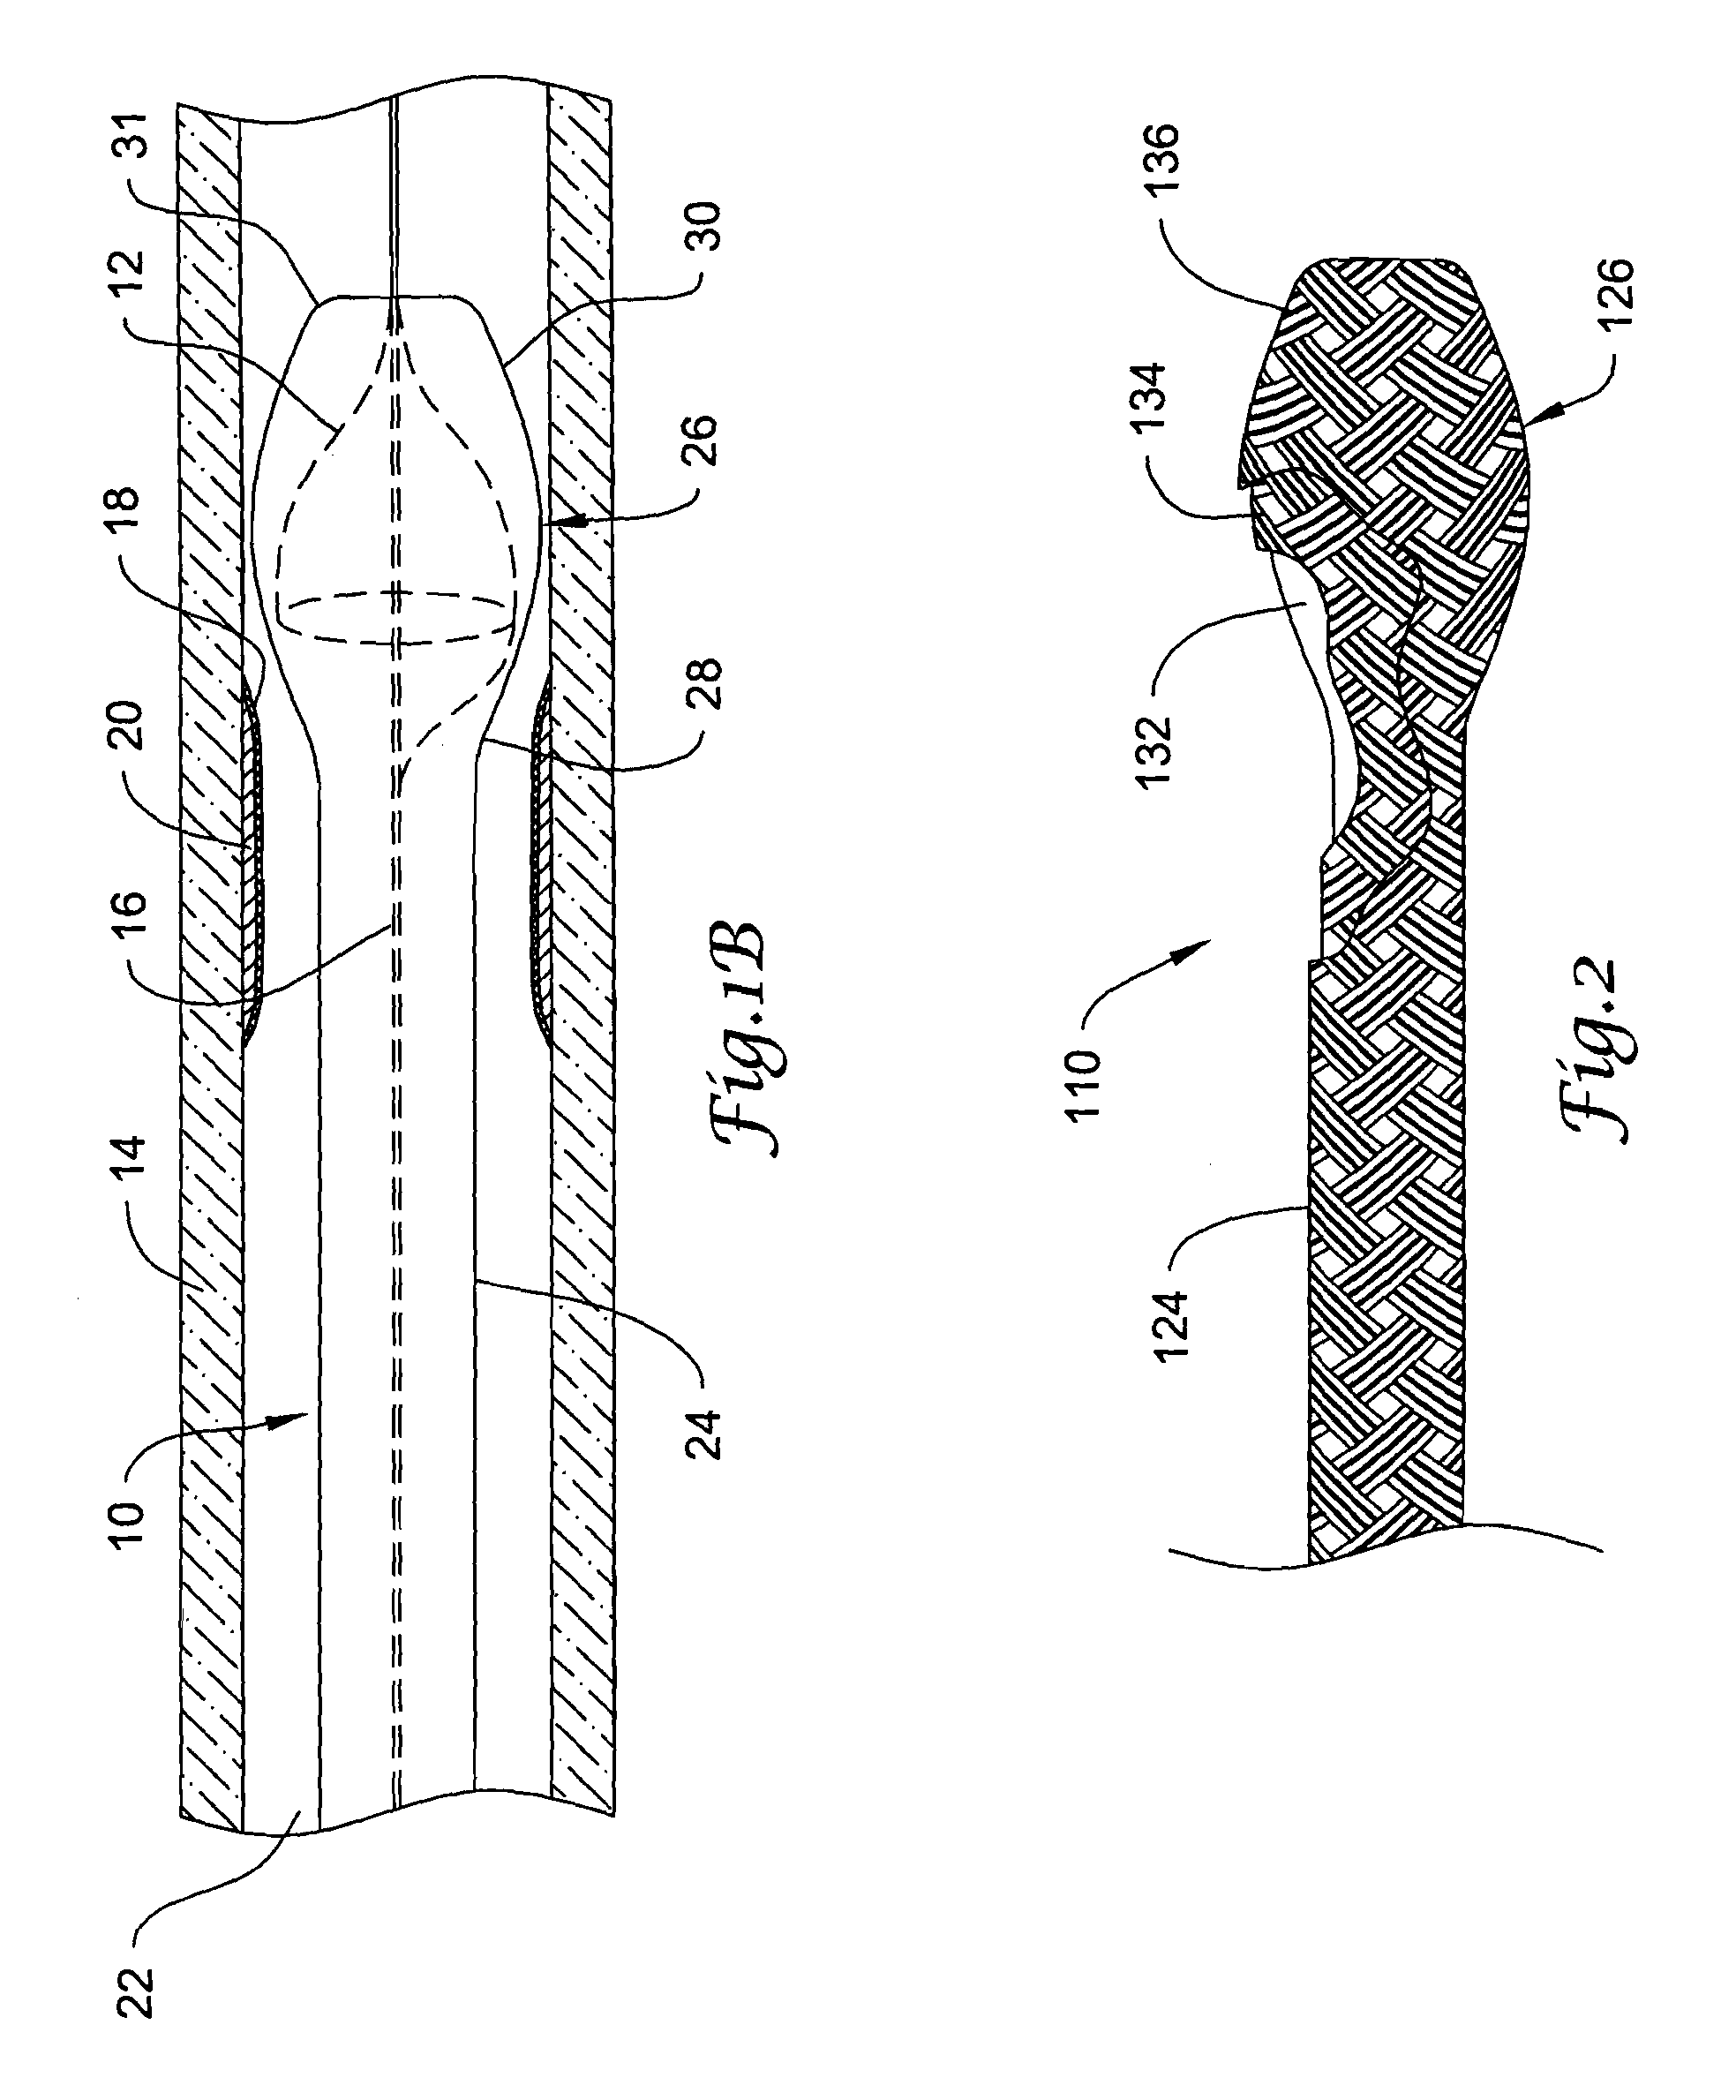 Sheath for use with an embolic protection filtering protection